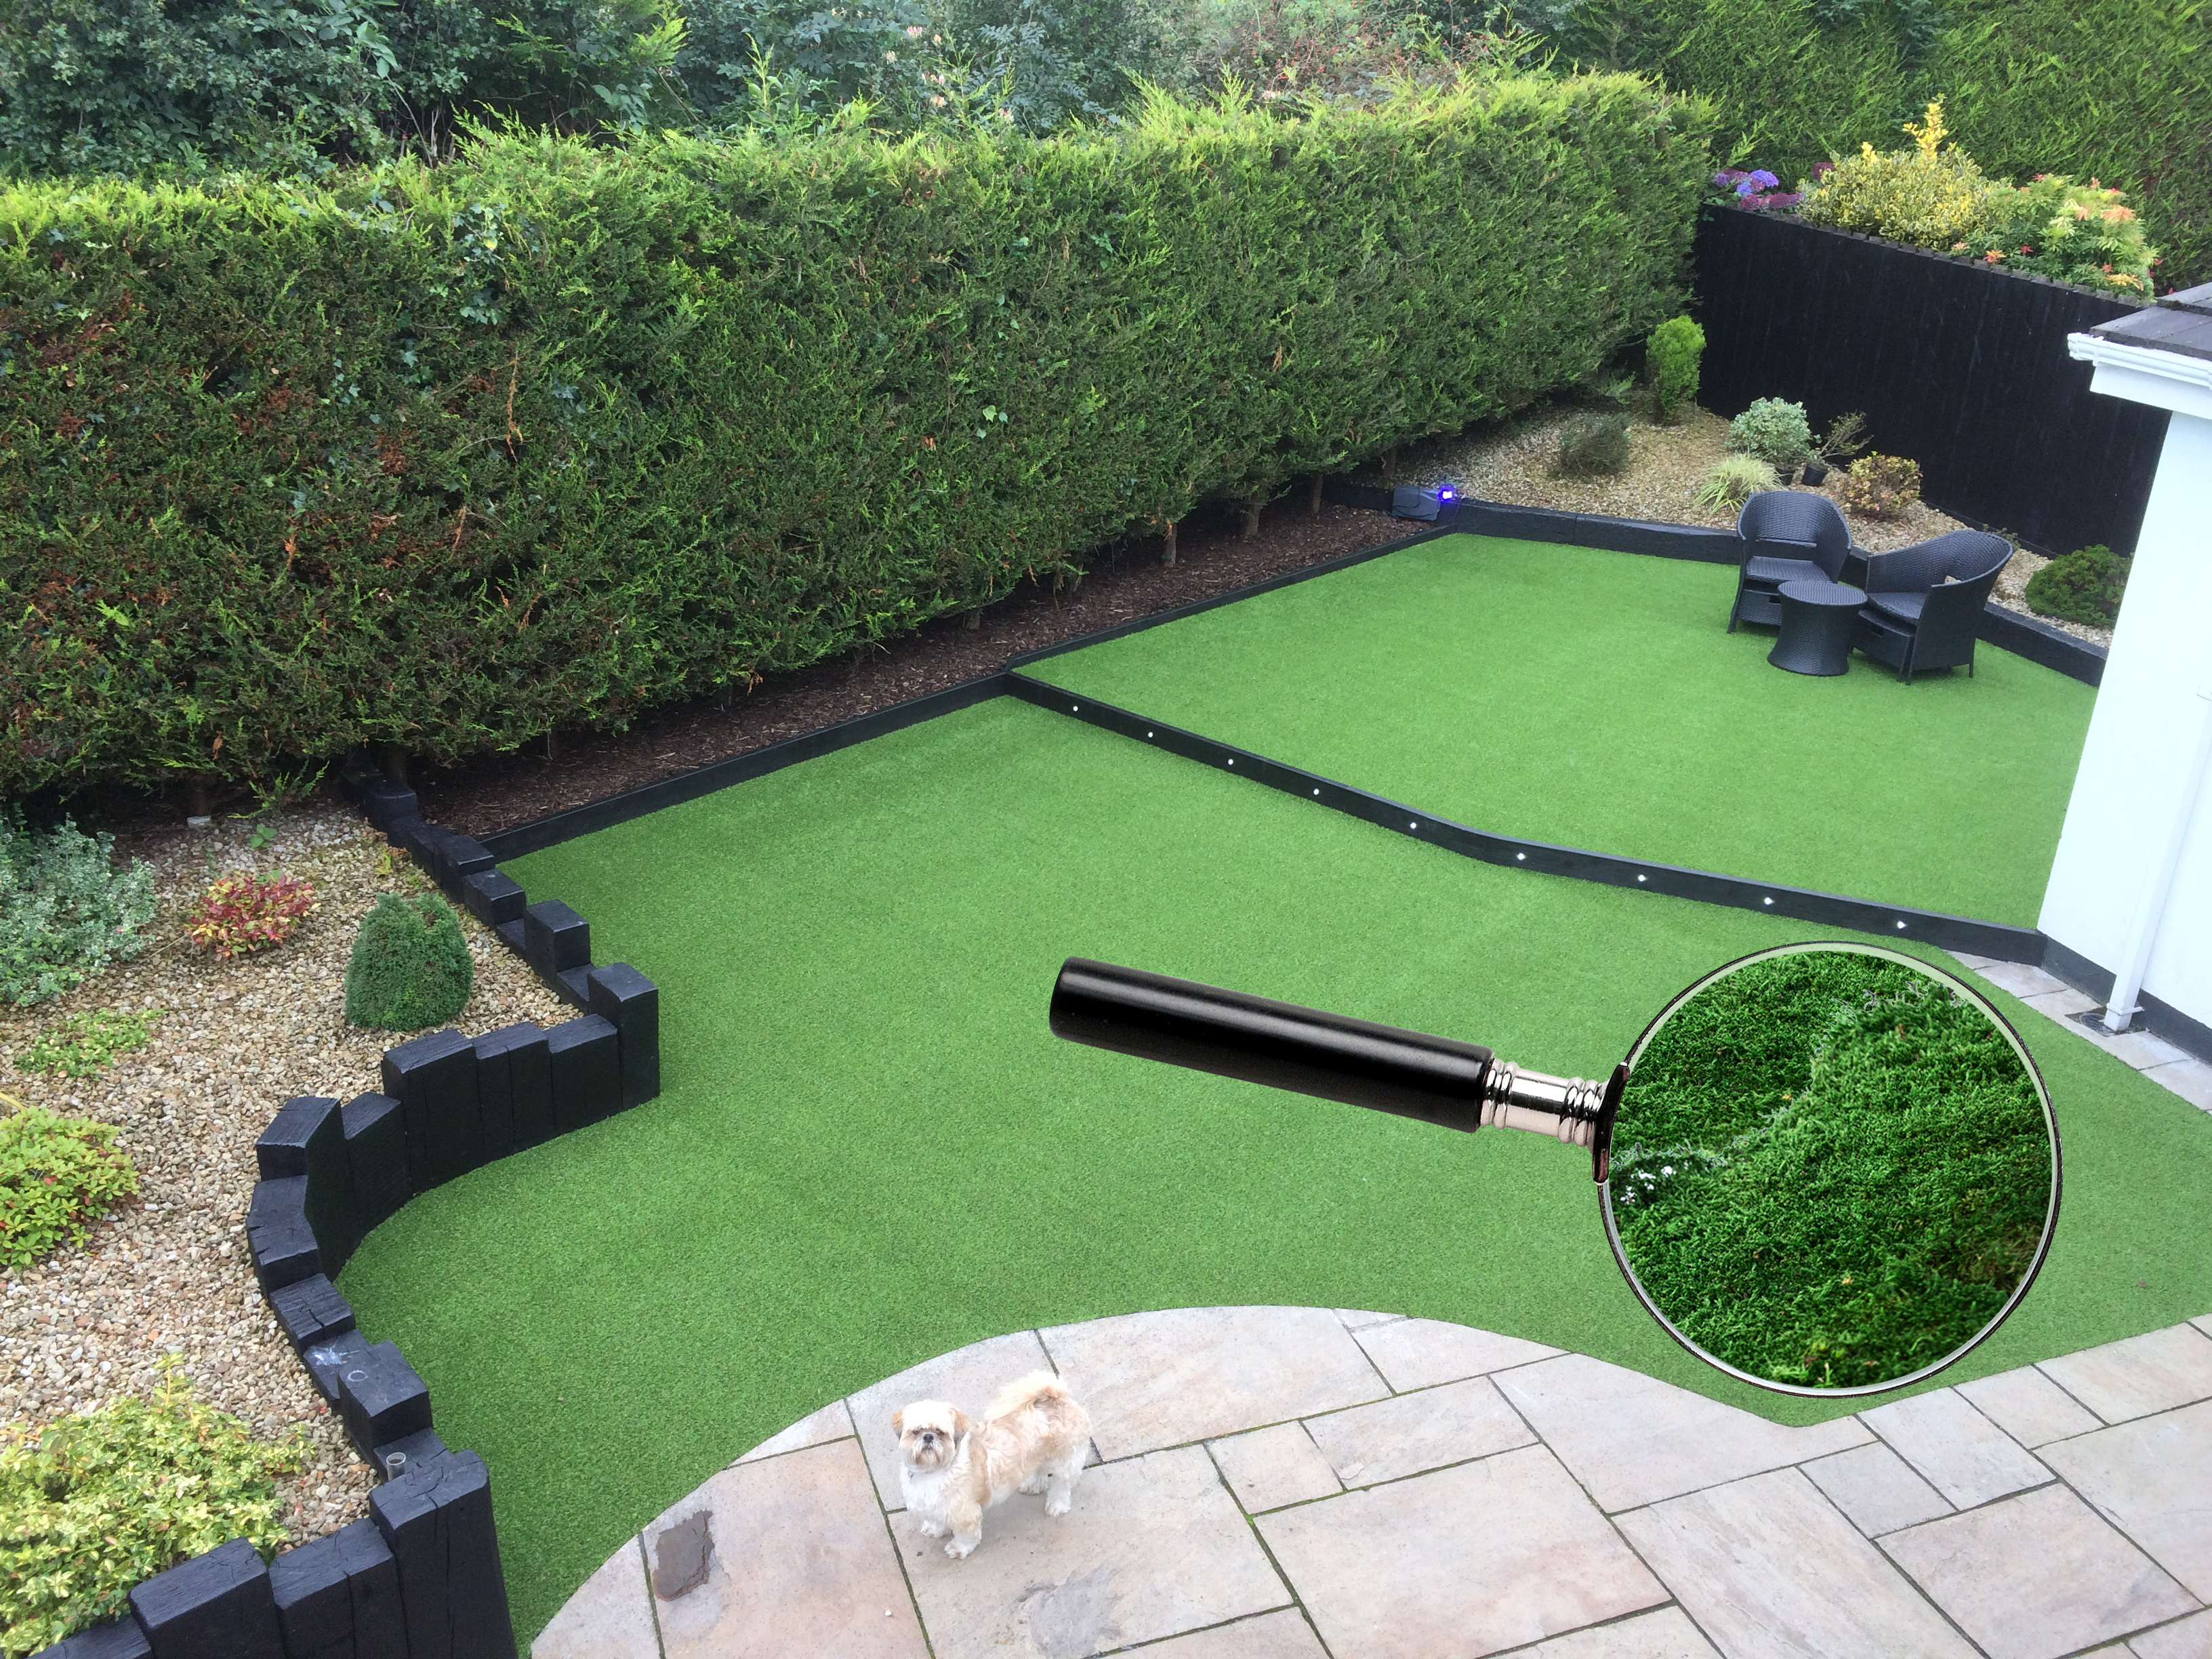 How to Treat Mould or Moss on Artificial Grass